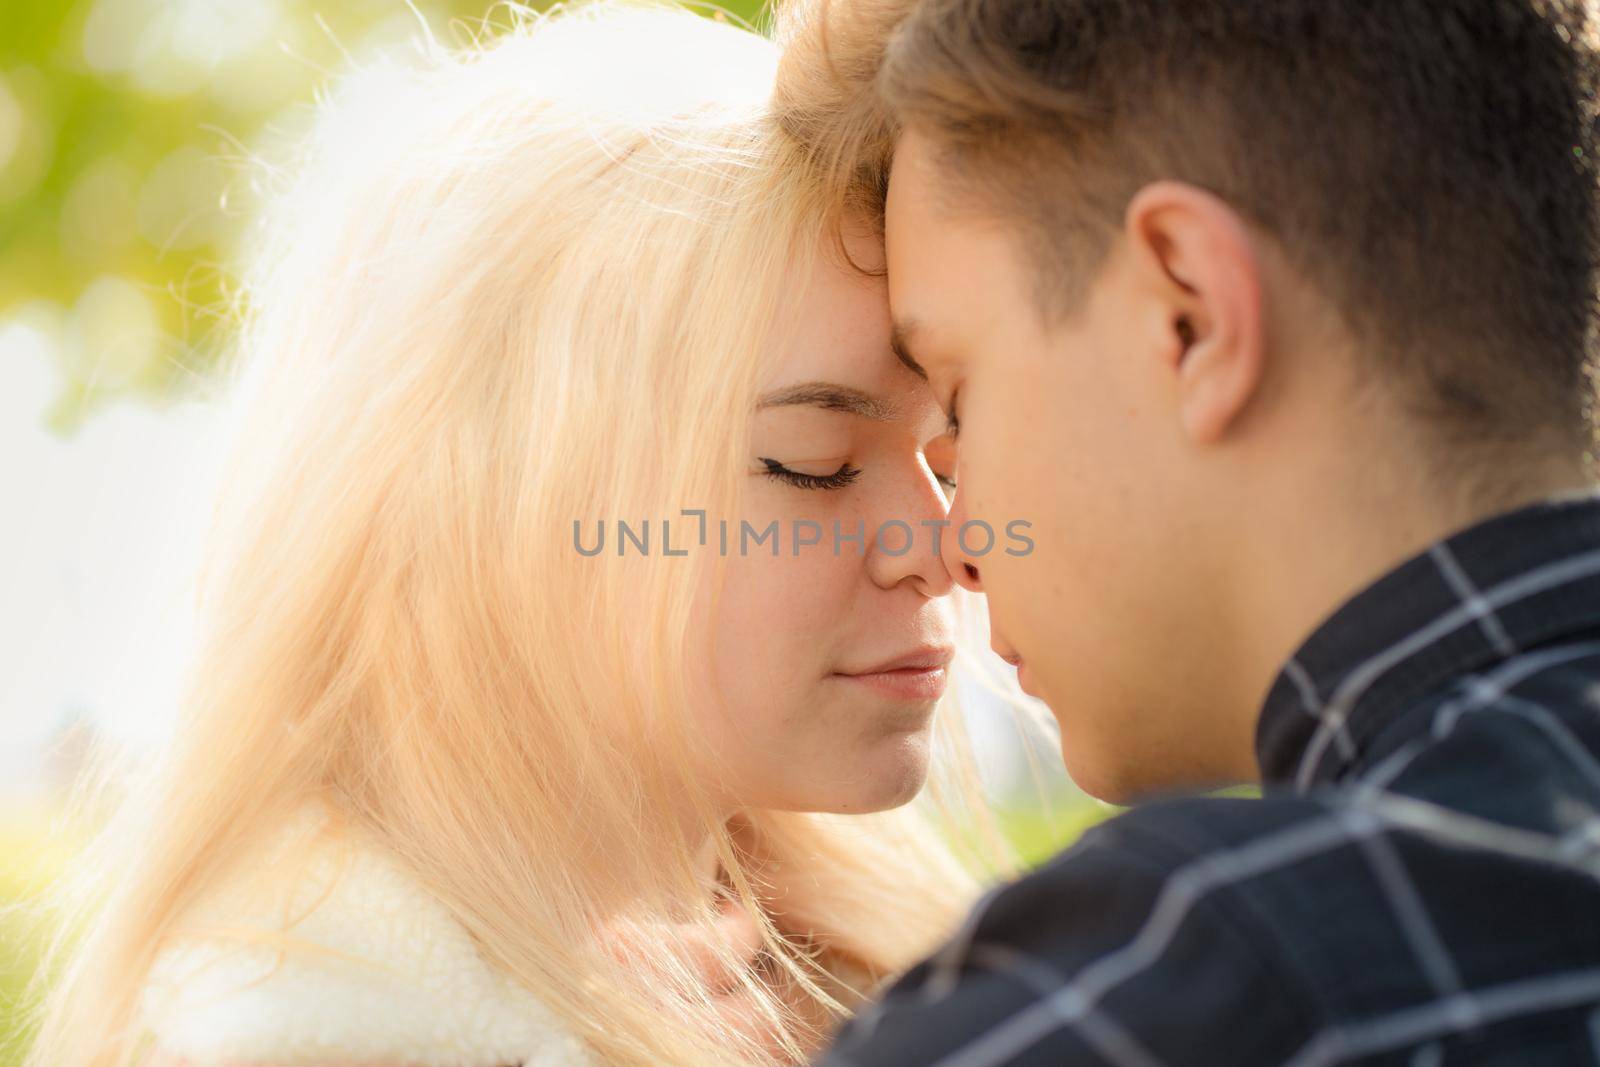 A man affectionately call looks at woman, guy and girl are worth close, touching tips noses. Concept of first teenage love and first kiss. Boy and girl, couple. Intimacy, honesty, trust, open feelings. Close up portrait. by NataBene